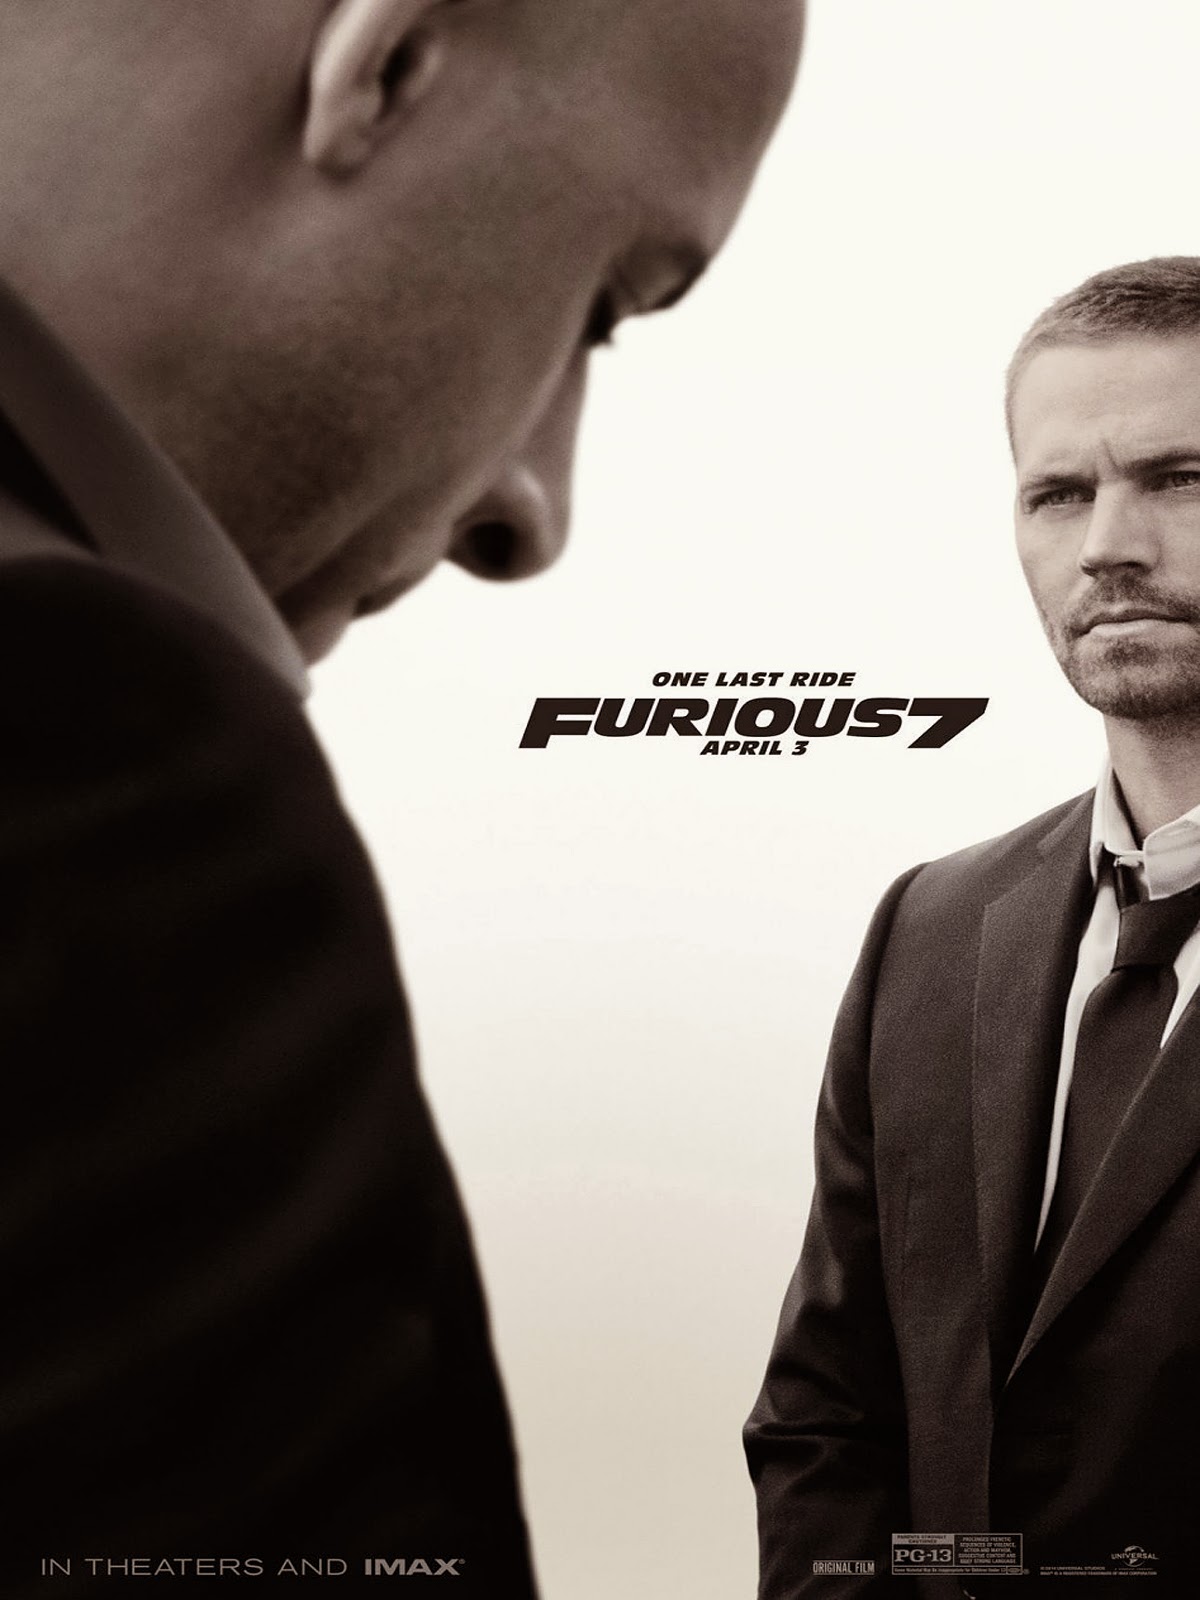 http://fuckingcinephiles.blogspot.fr/2015/03/critique-fast-and-furious-7.html